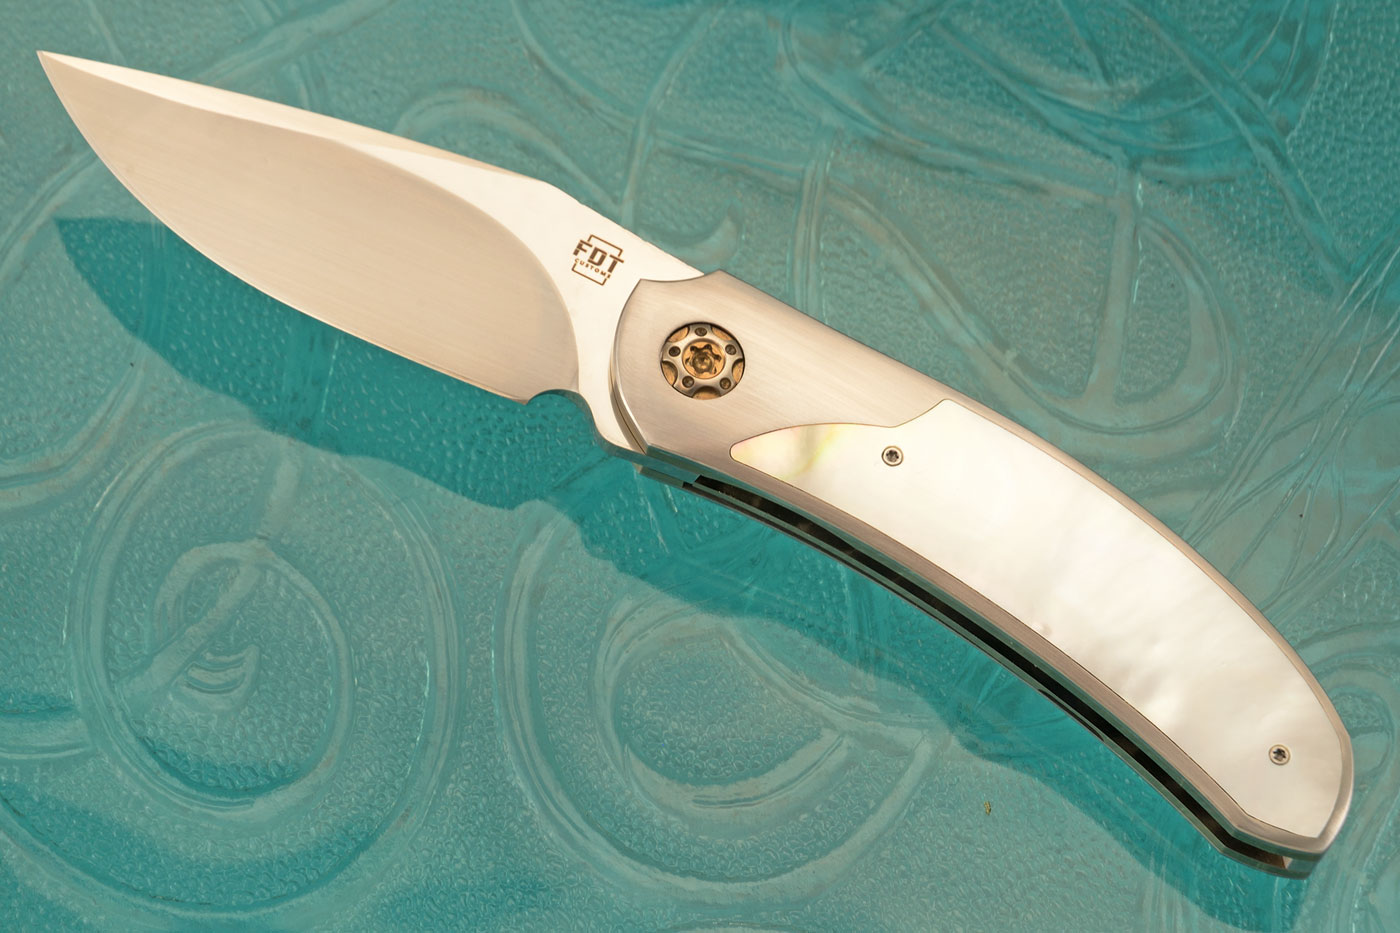 TF-4 Front Flipper with Goldlip Mother of Pearl (Ceramic IKBS) - RWL-34